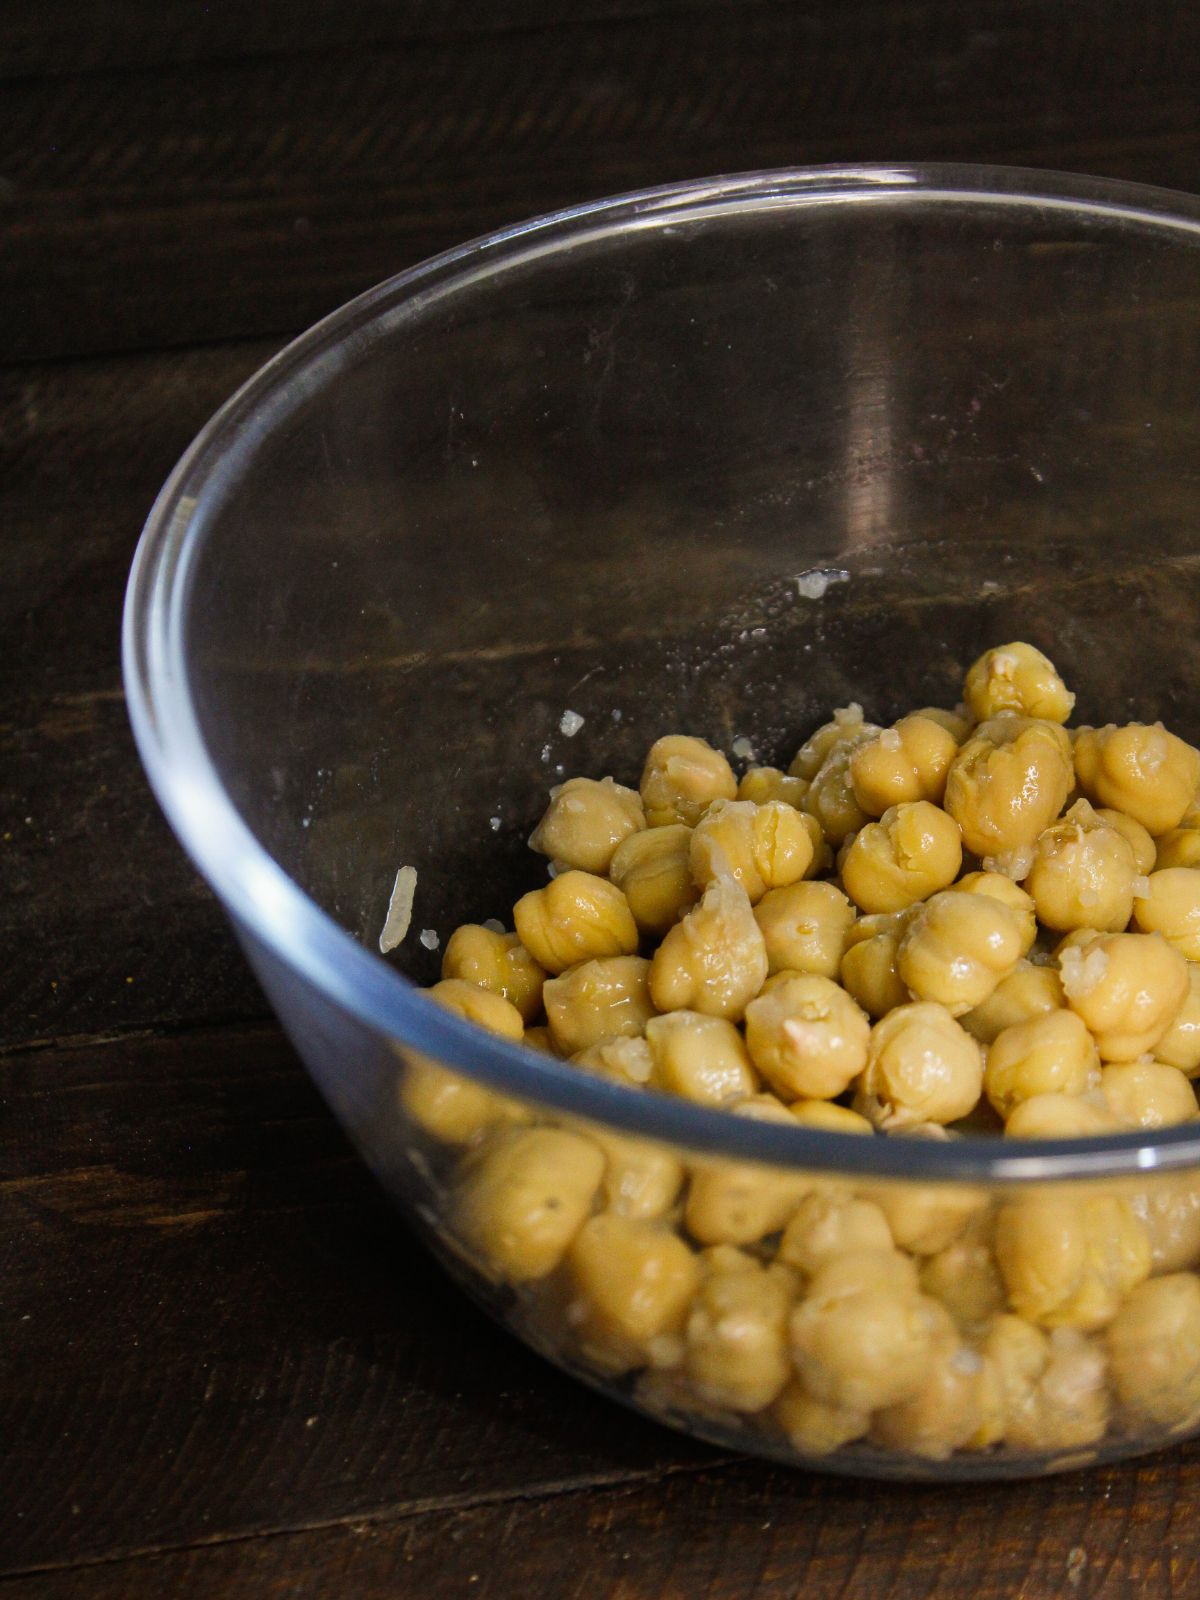 Soaked chickpeas transferred to bowl